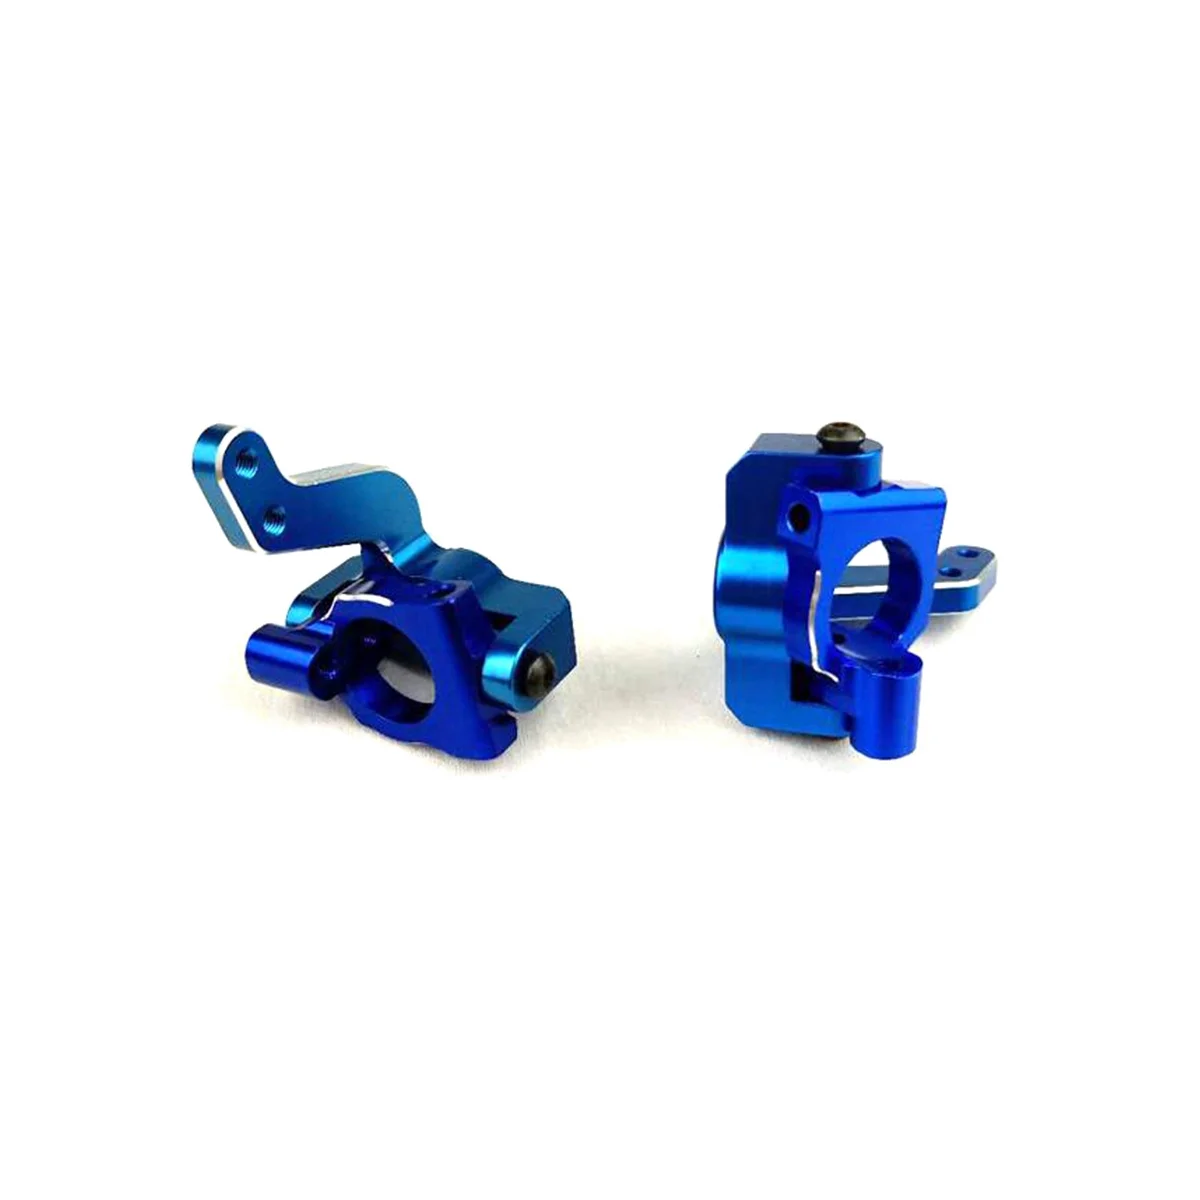 

2 Pcs RC Car Upgrade Parts 10917 Alum Steering Knuckle Arm for VRX RACING 1/10 Scale Rc Model Car Parts Toys